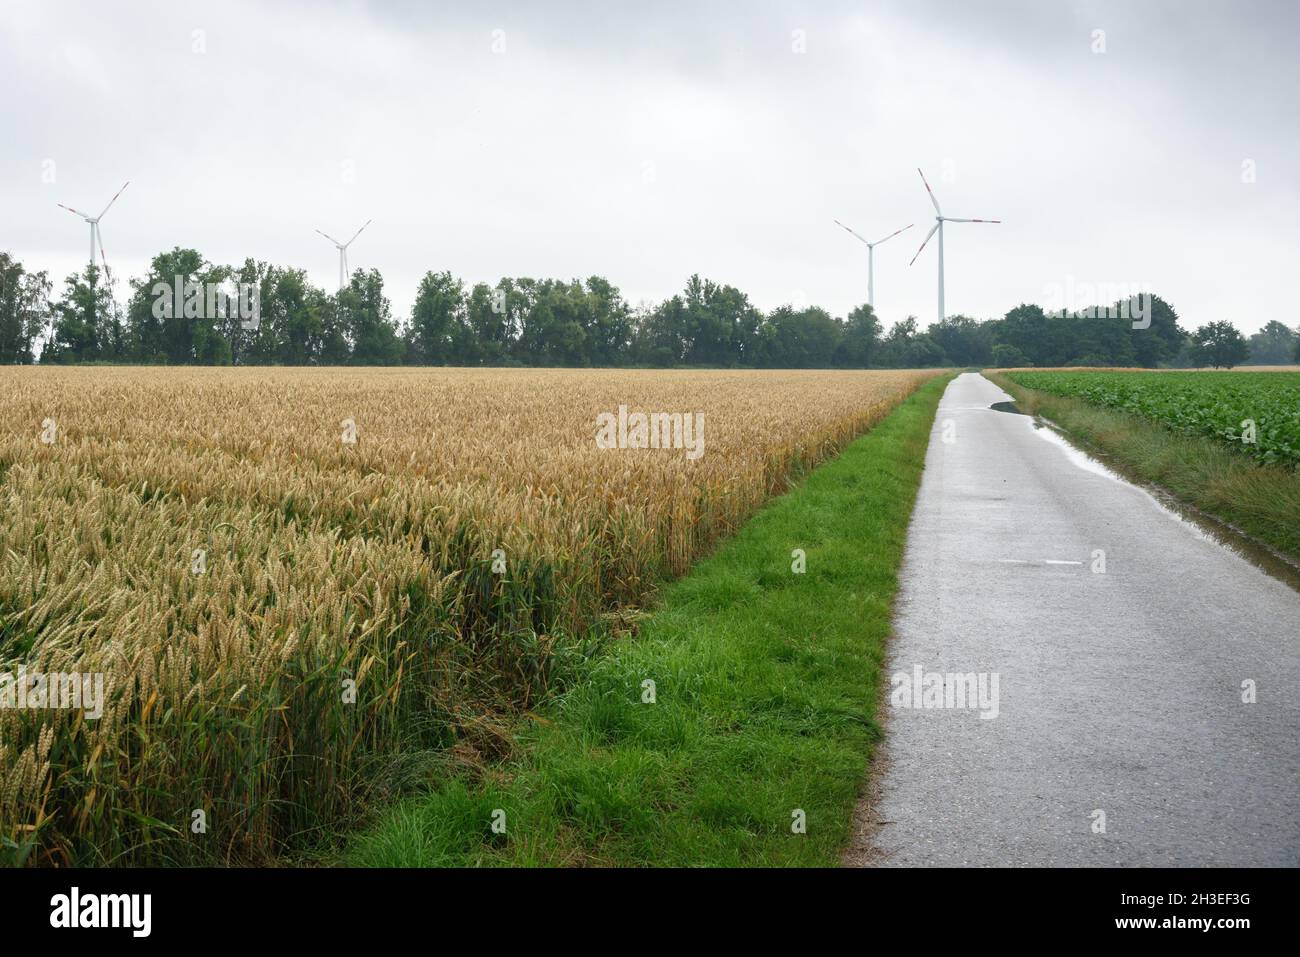 Deserted paved path through cultivated fields in the countryside of Germany on a foggy day. A wind farm is visible in background. Stock Photo